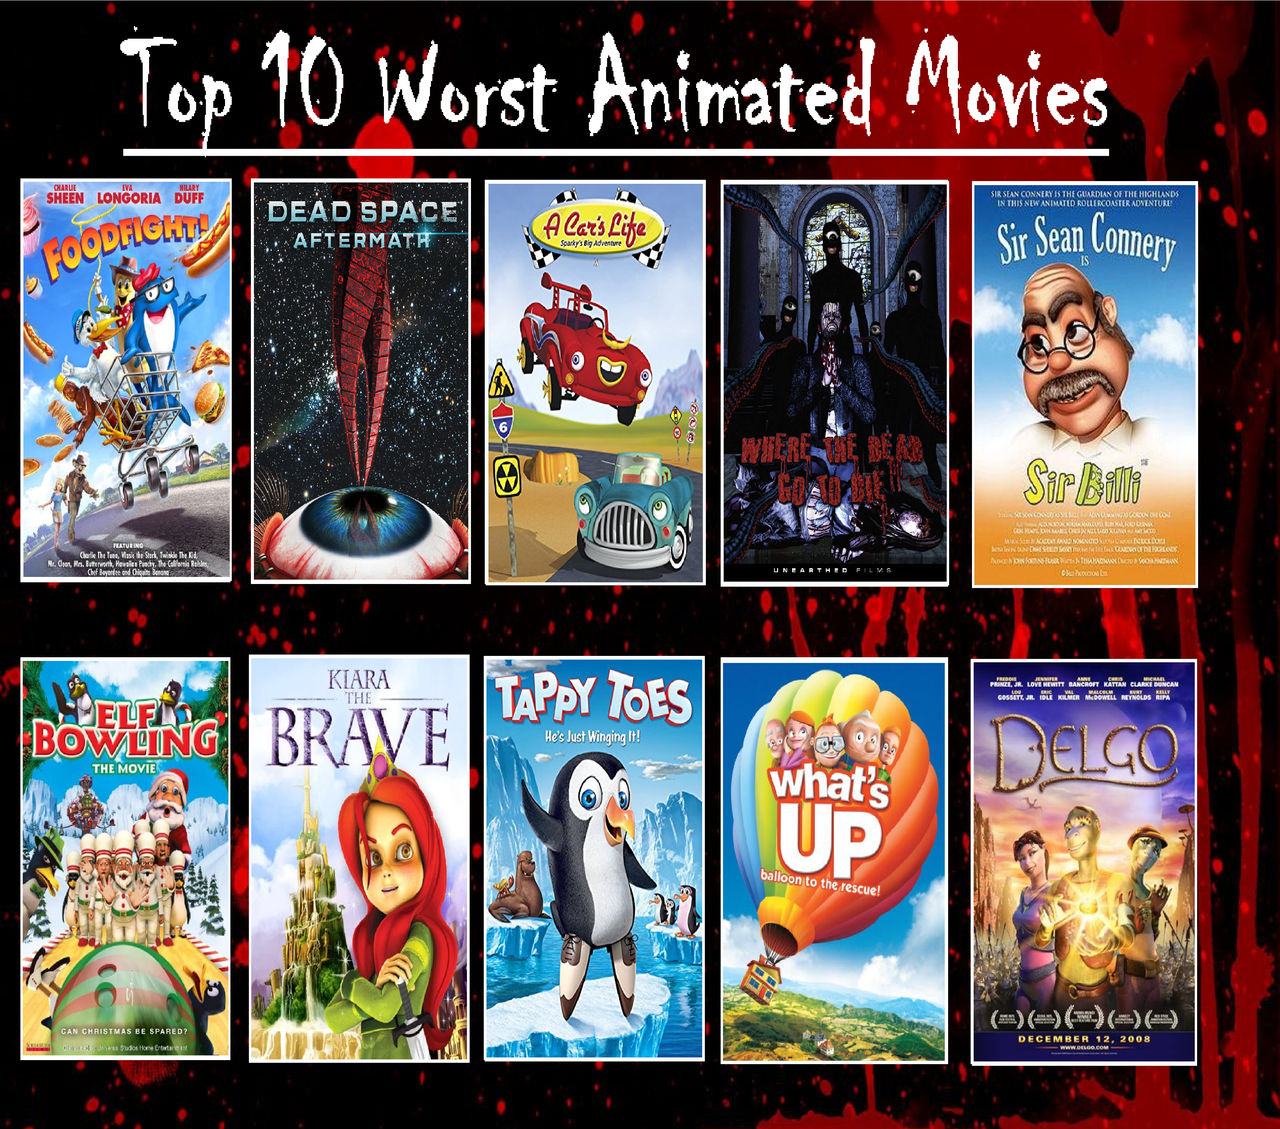 Top 10 Worst Animated Movies by Perro2017 on DeviantArt